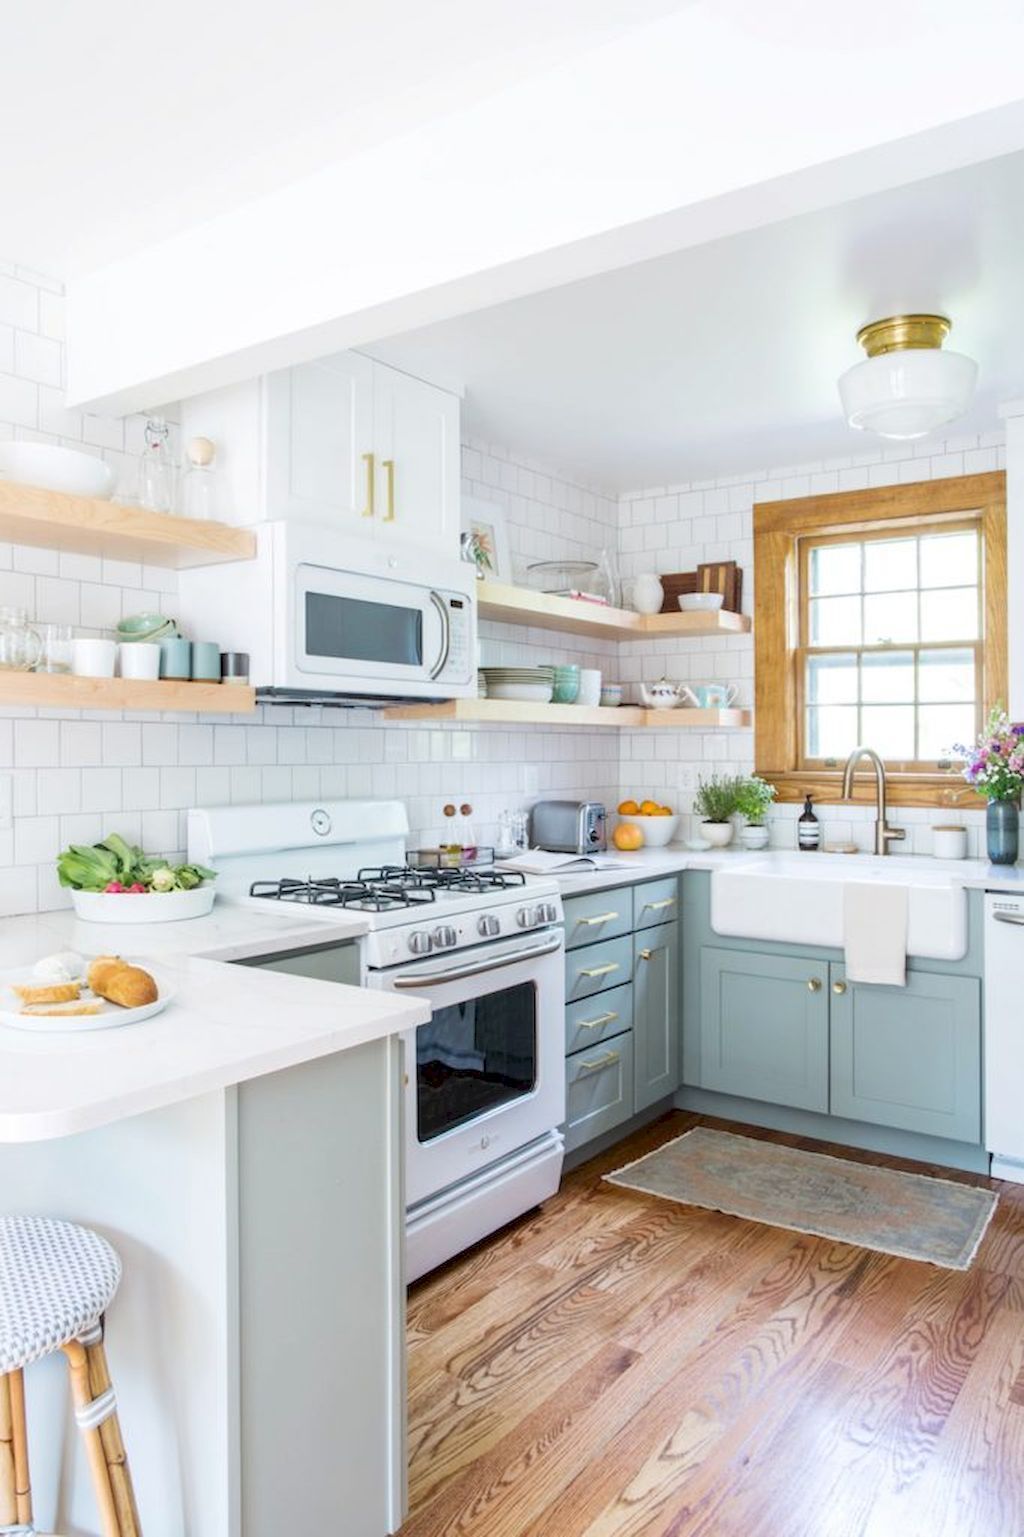 Tips and ideas for redesigning a small kitchen